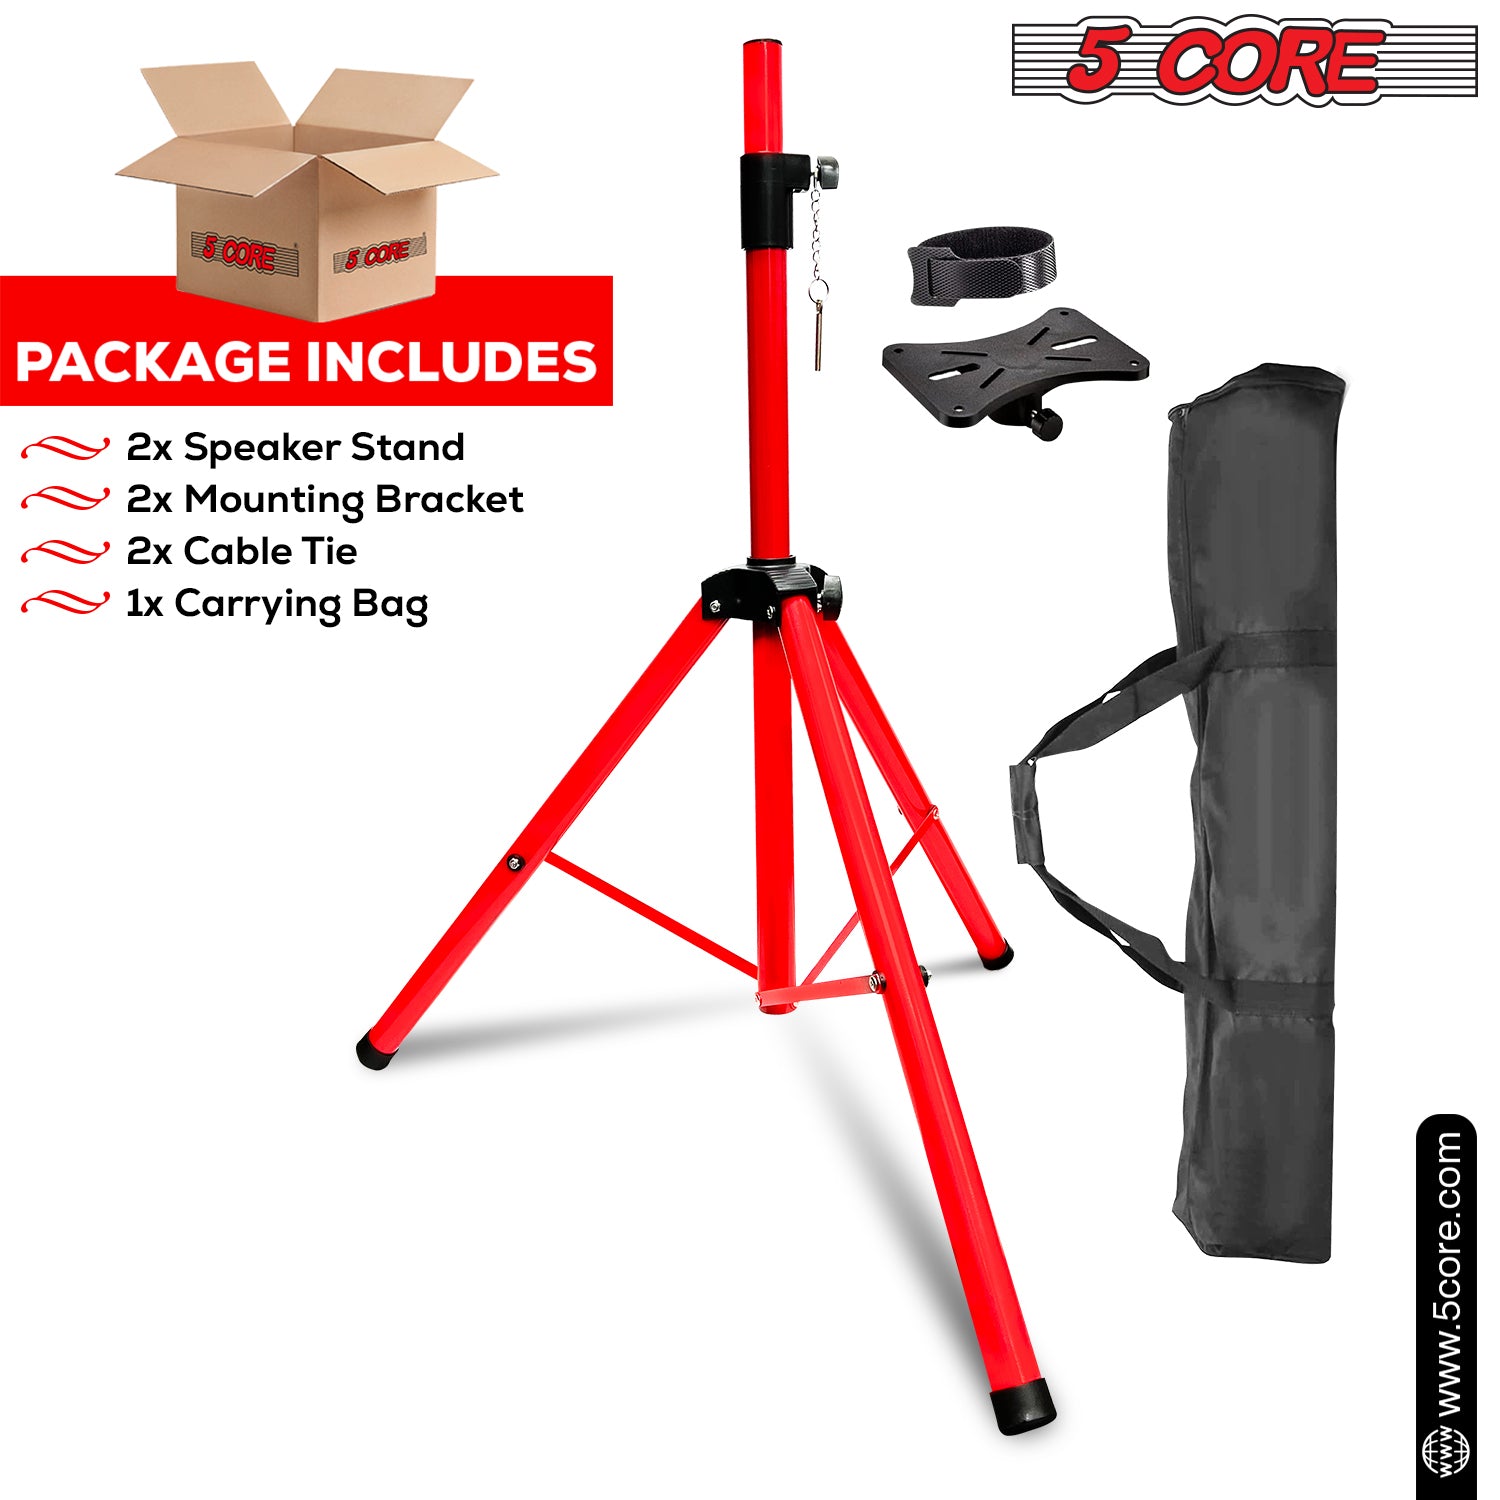 5Core Speaker Stands Tripod Tall DJ Studio Monitor stands 72" Pole Mount Red with Bag